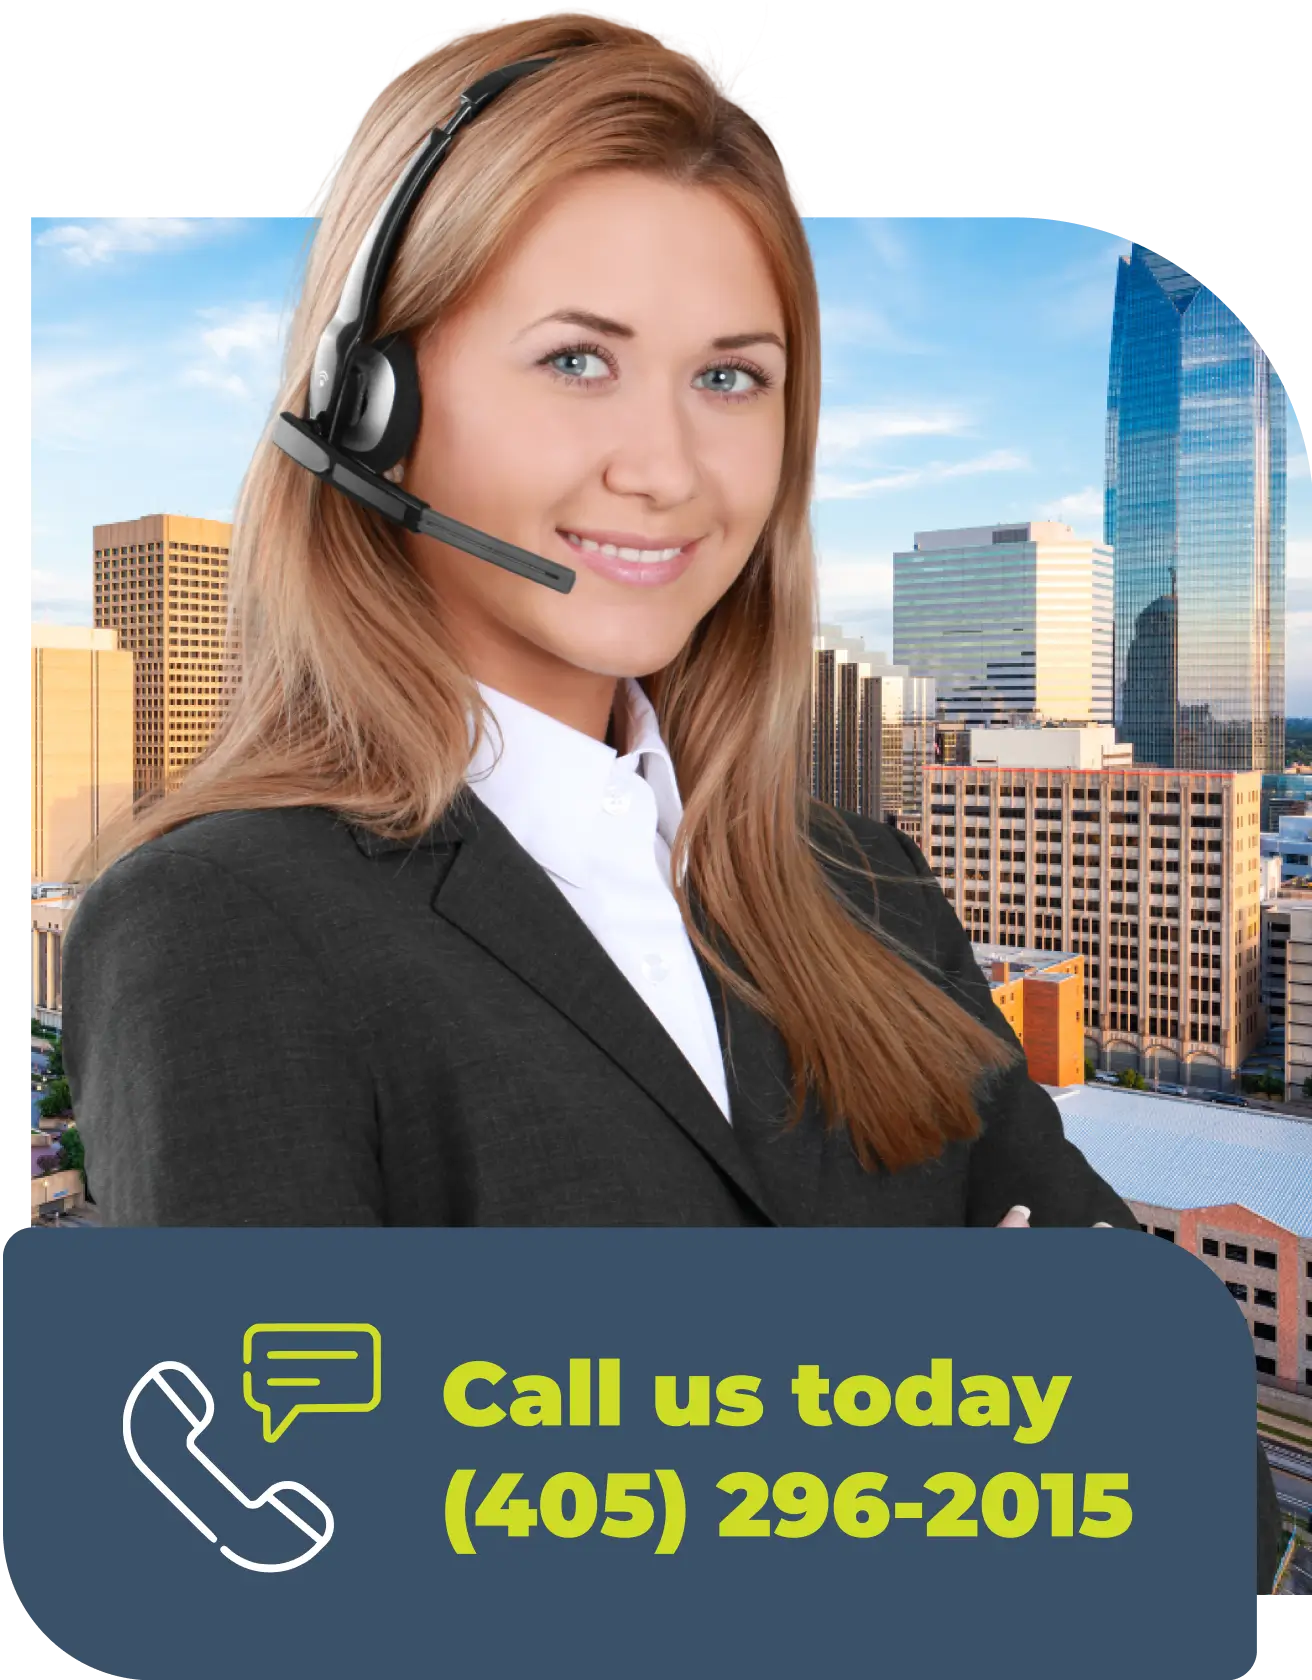 Speak With Our Team